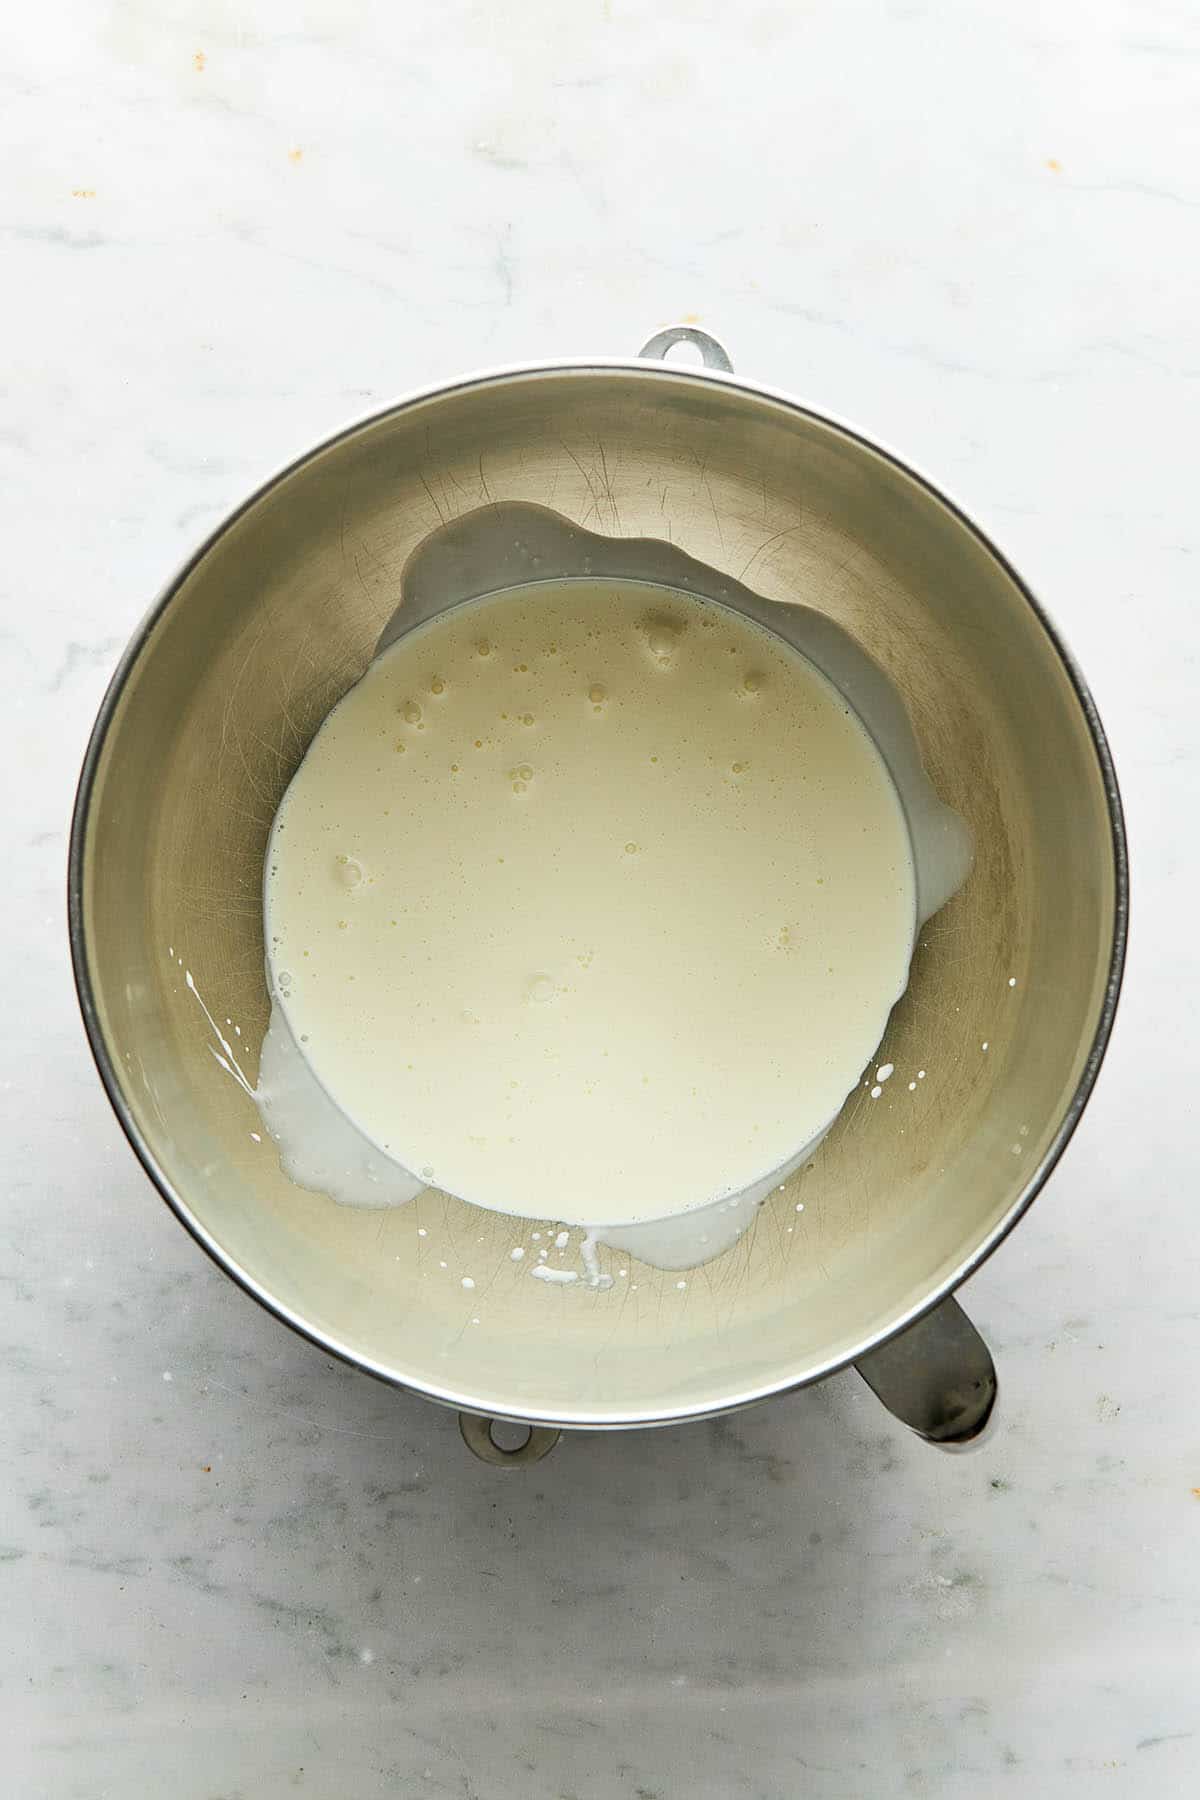 Heavy cream inside a metal mixing bowl.